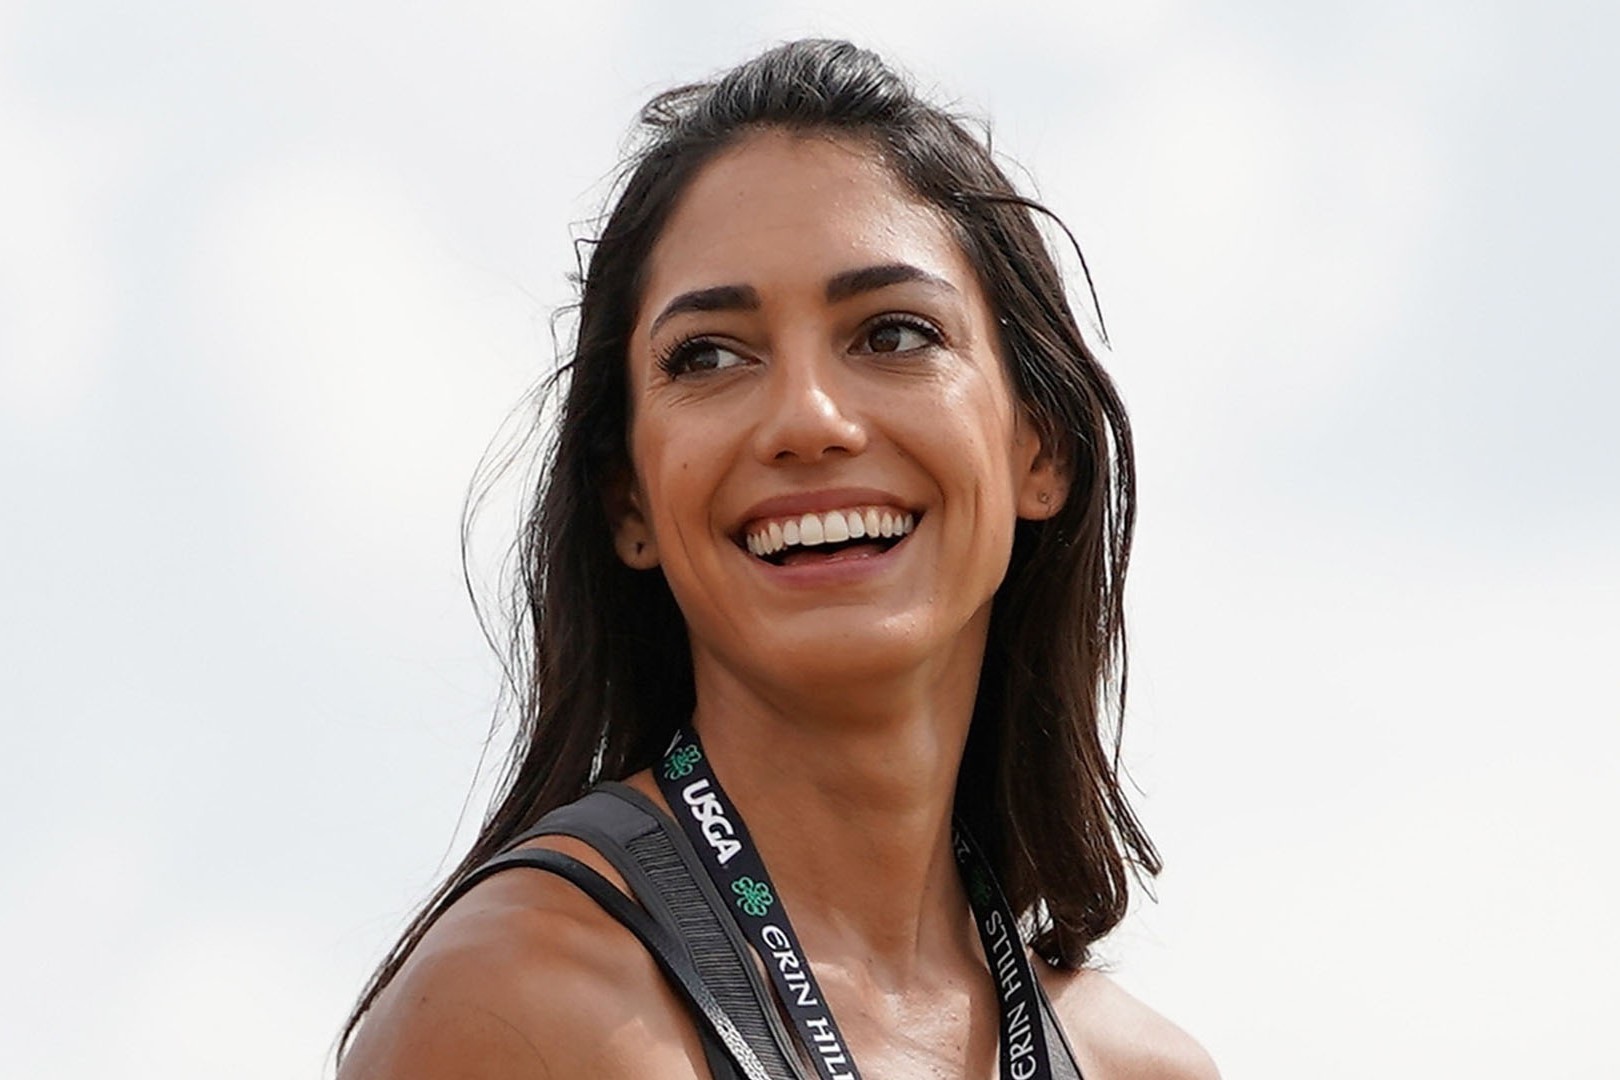 Allison Stokke Age, Biography, Height, Personal Life, Net Worth & Facts